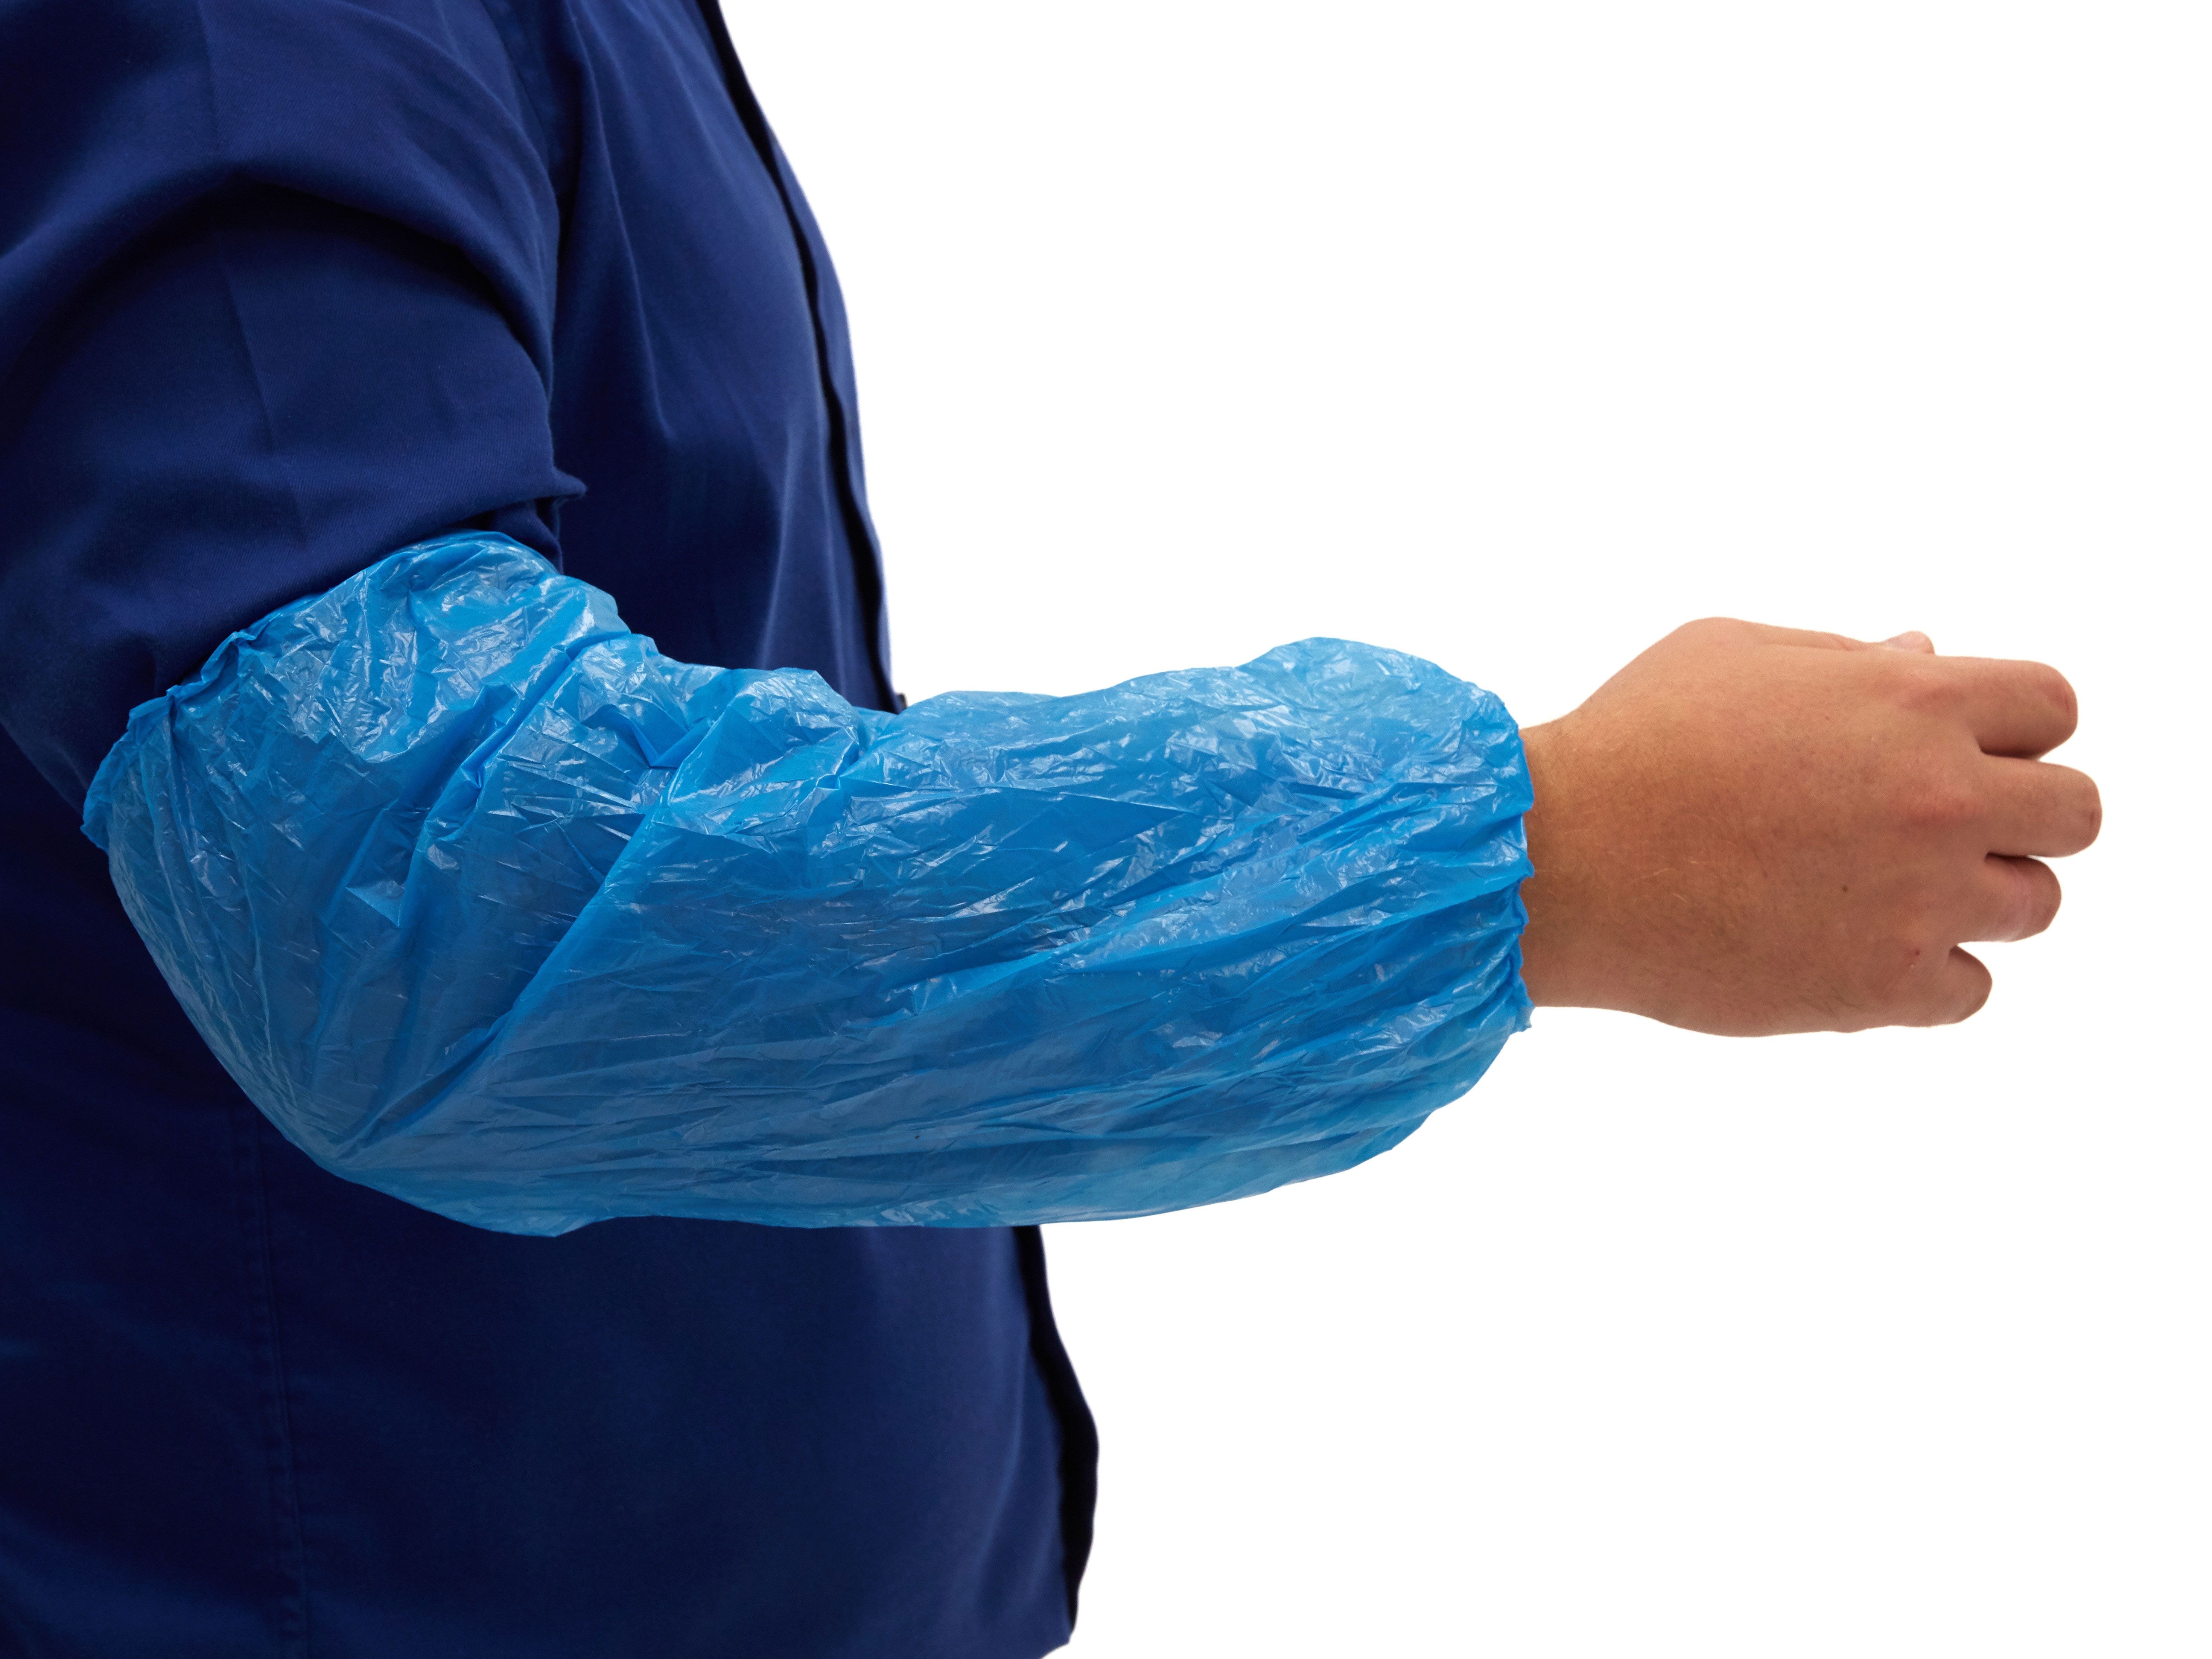 SLEEVE-B Romed polyethylene sleeve covers, blue, Size: 20x40cm, per 10 pcs in a bundle
and per 100 pcs in a polybag, 10 x 100 pcs = 1.000 pcs in a carton.